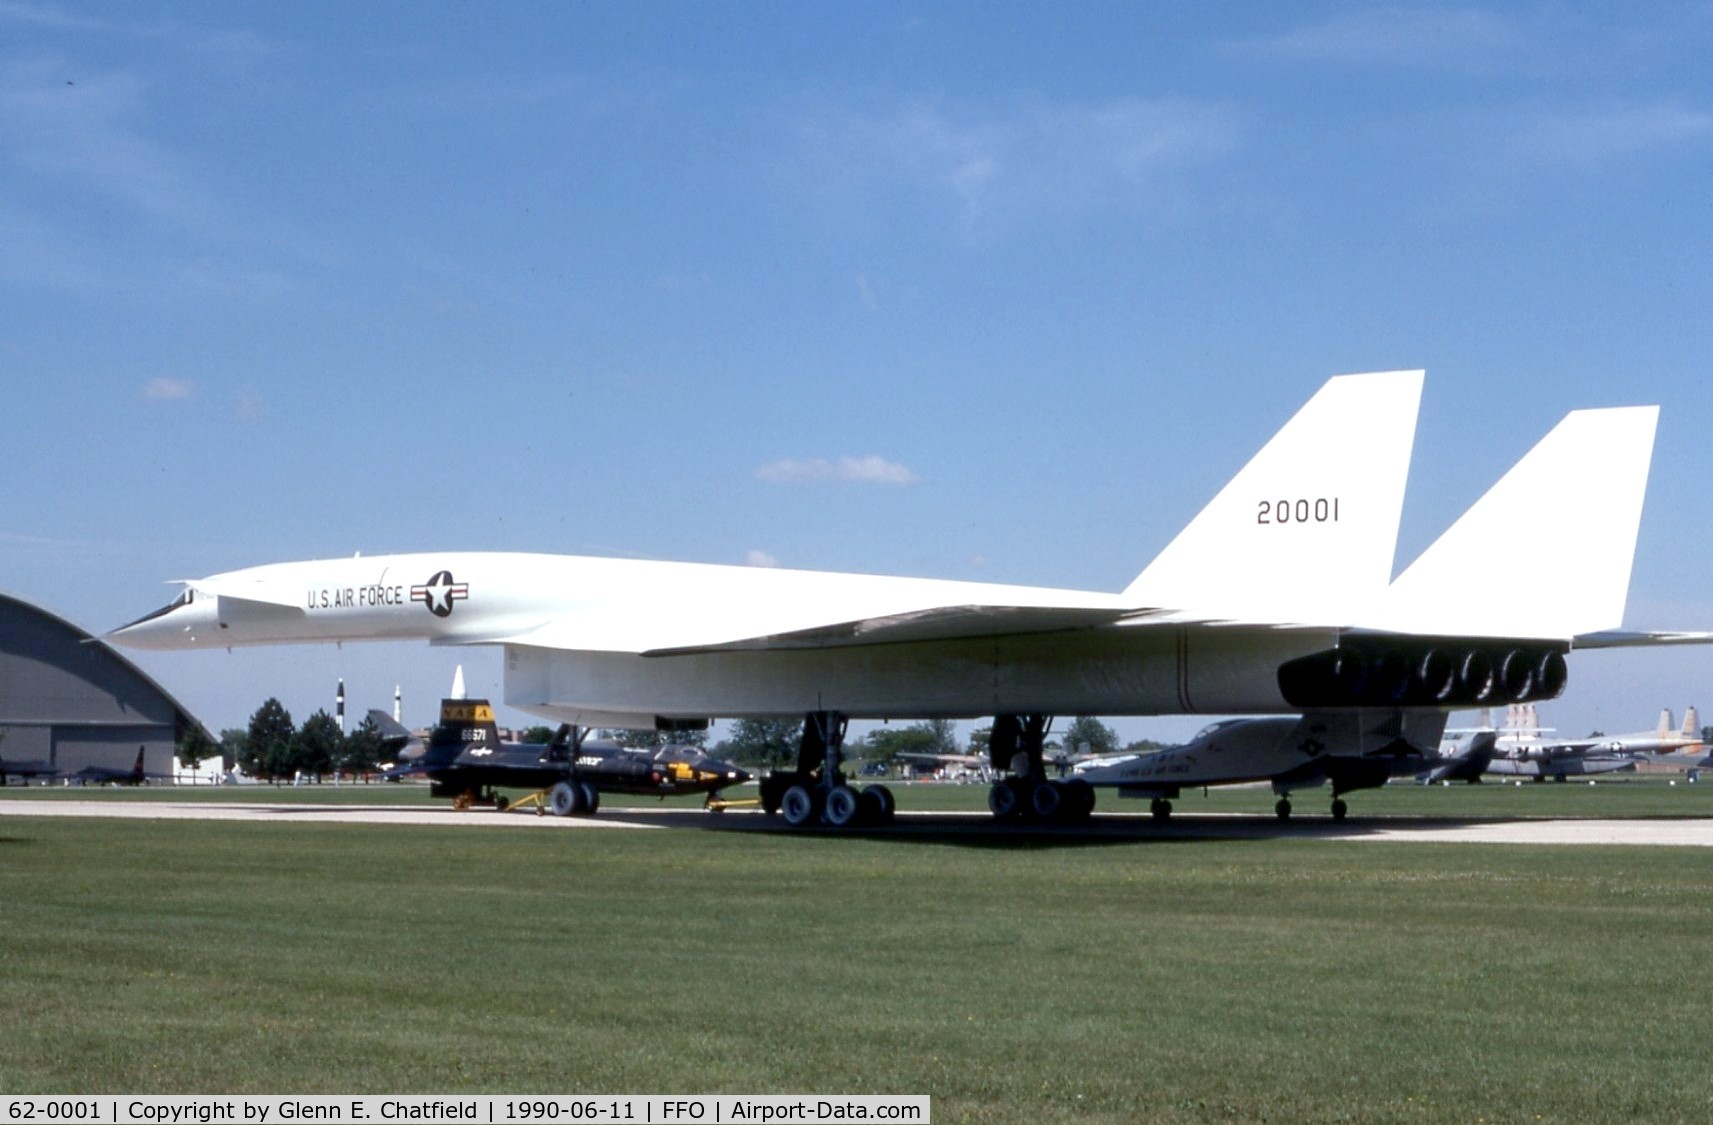 62-0001, 1964 North American XB-70A Valkyrie C/N 278-1, XB-70 at the National Museum of the U.S. Air Force